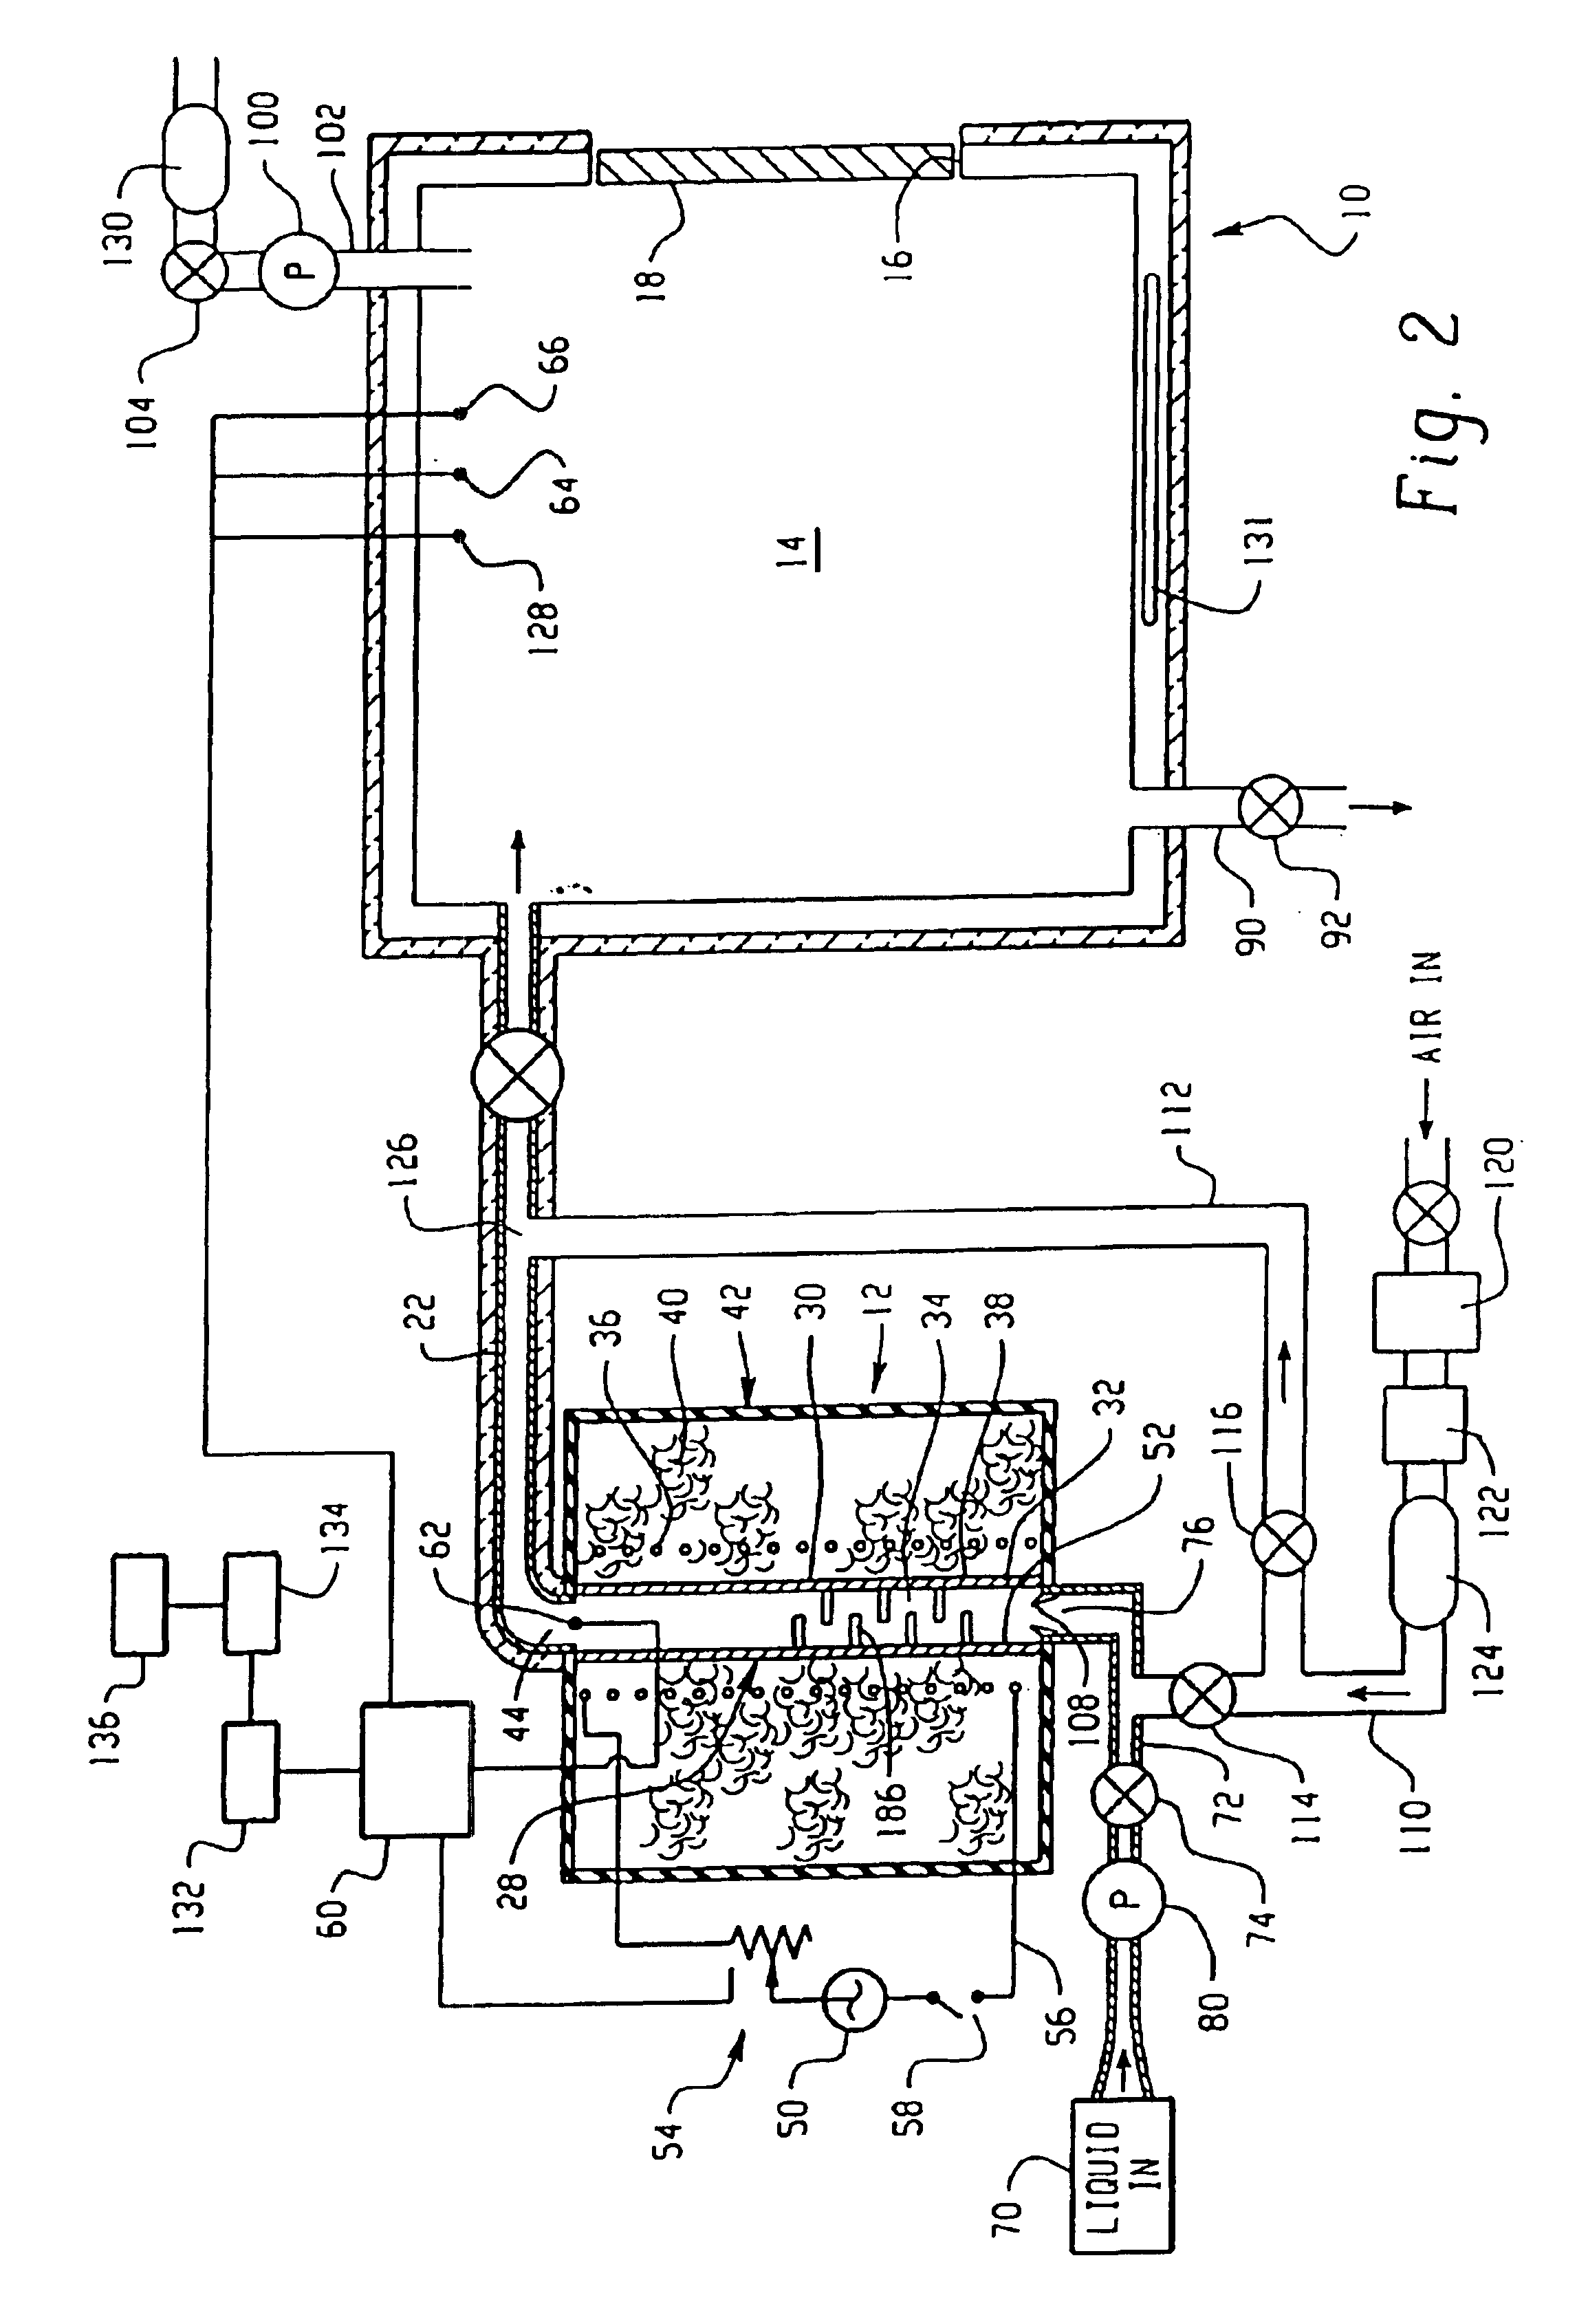 Electromagnetically responsive heating apparatus for vaporizer